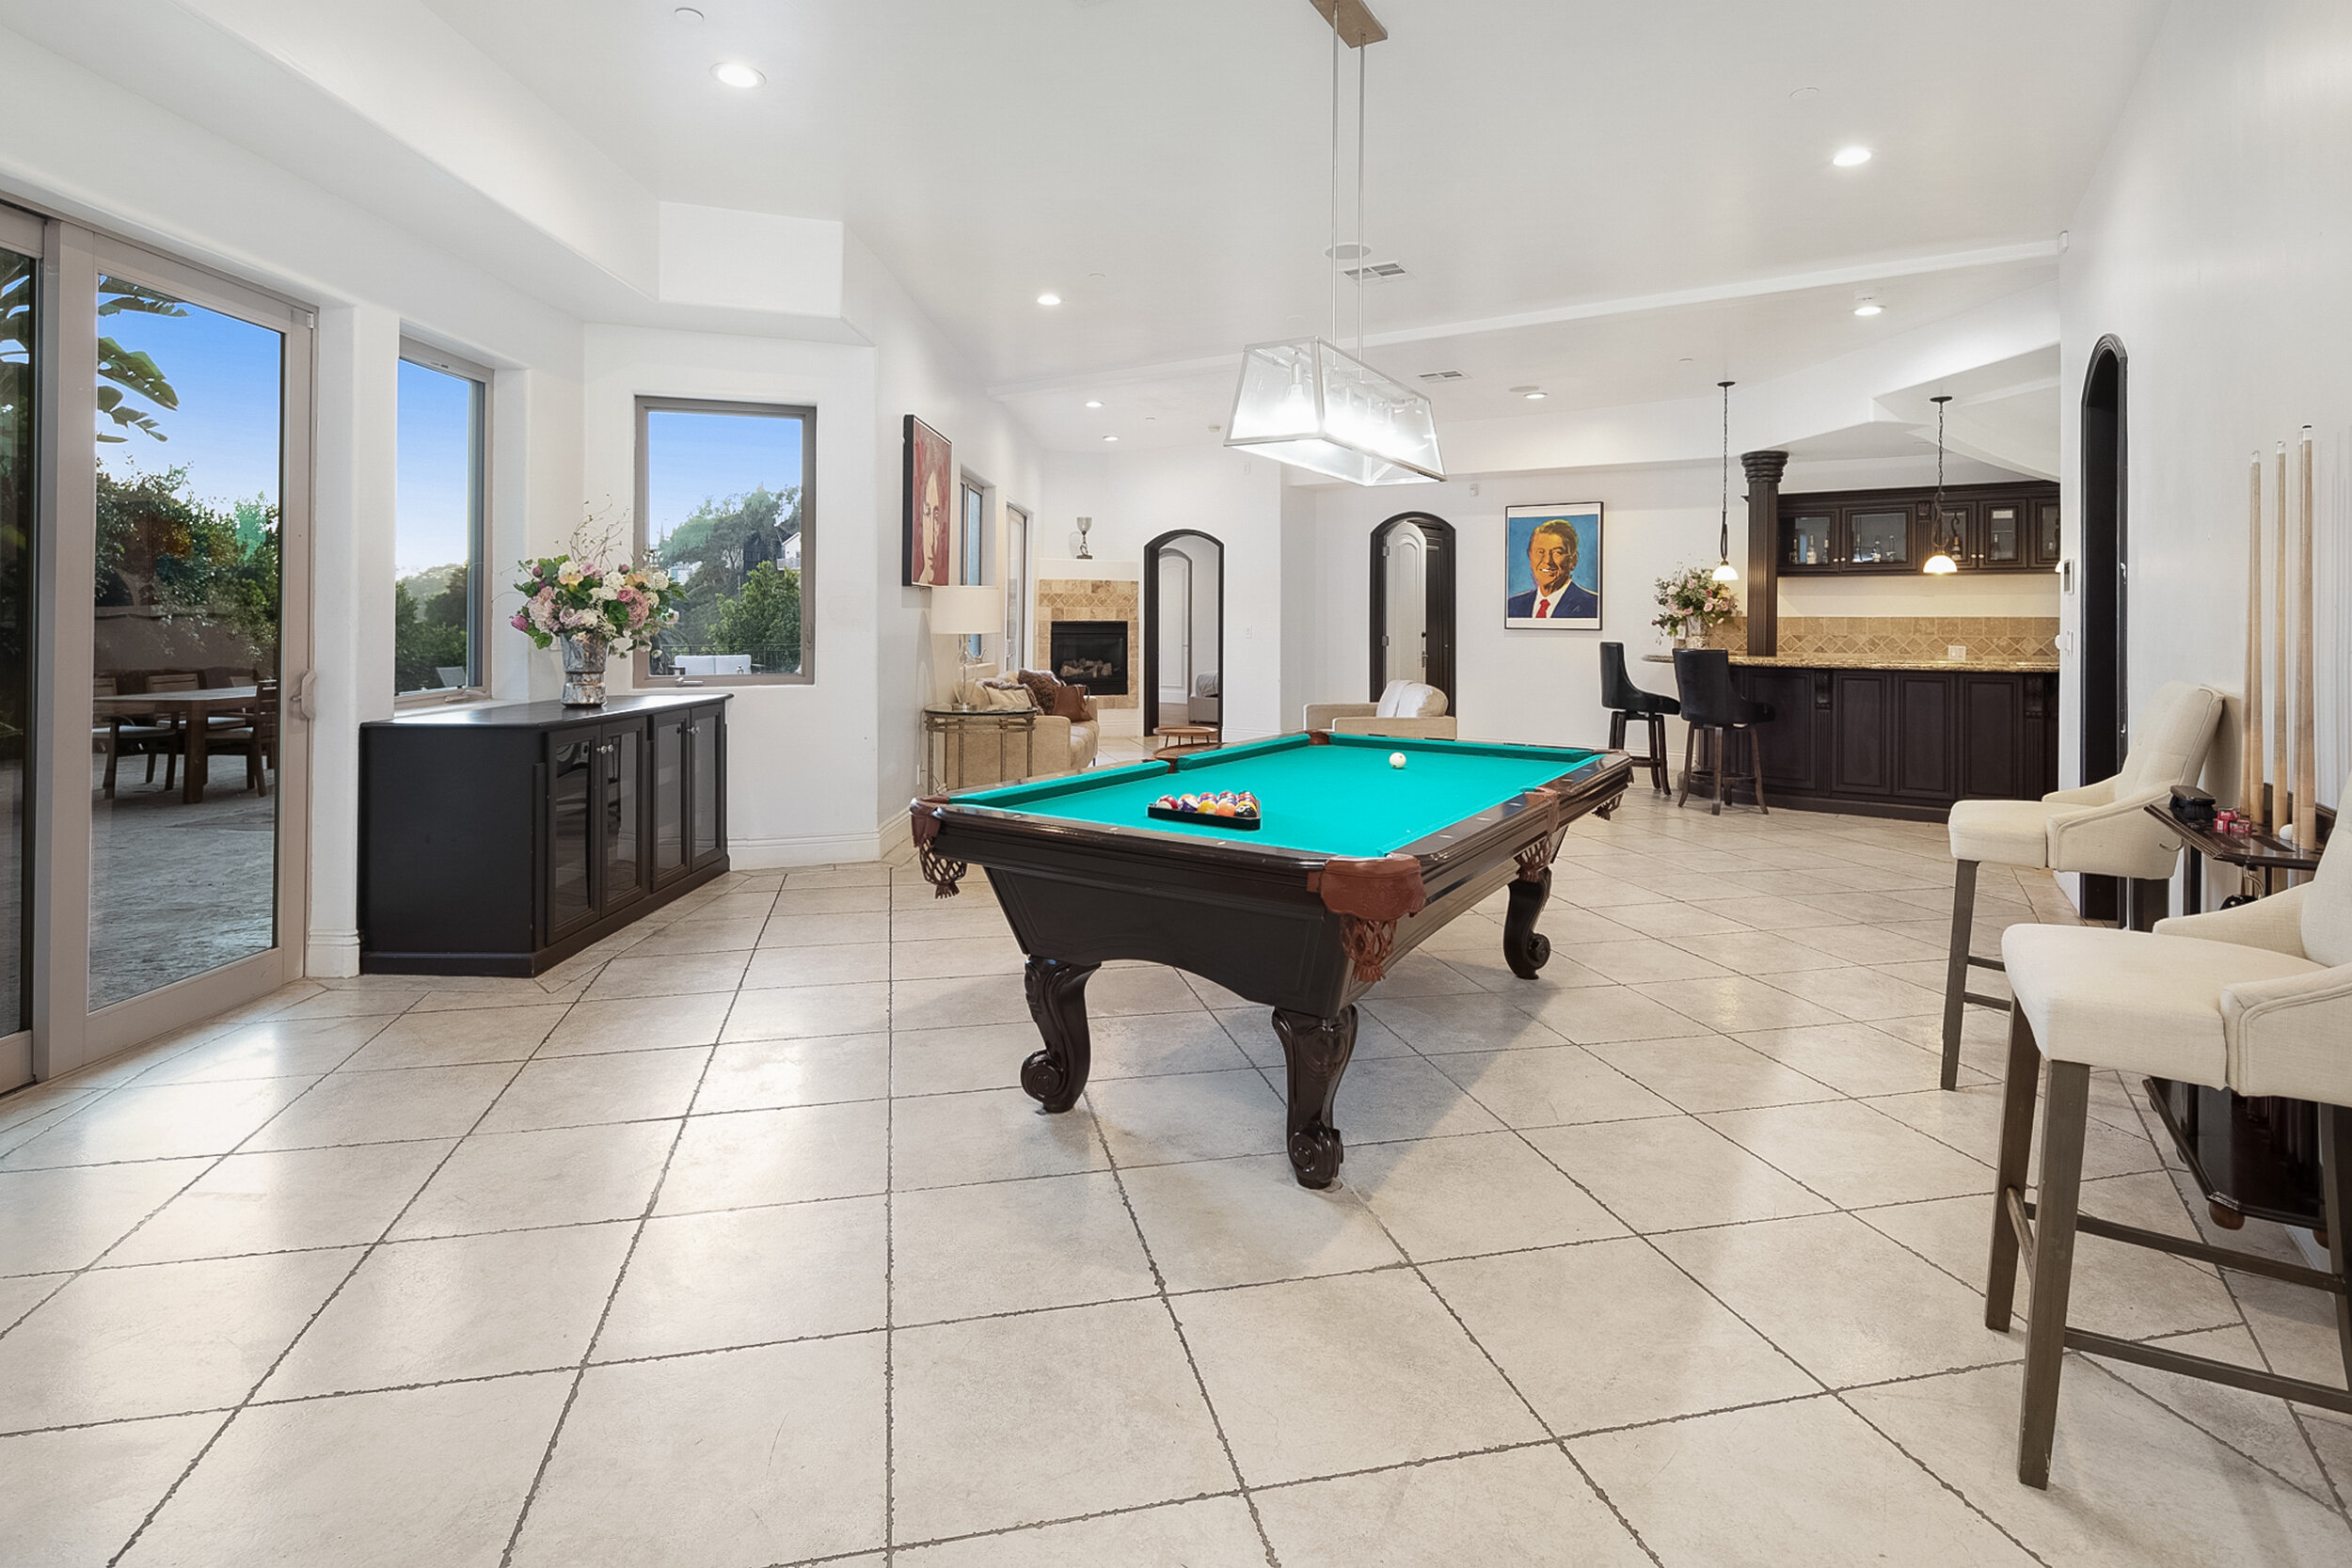 Deep Dell 2 - Hollywood Hills, 7BR, 8BA, 6597 Sq-ft, Spanish Style, Game Room, Theater, Rooftop Deck, Pool, Spa, View-17.jpg